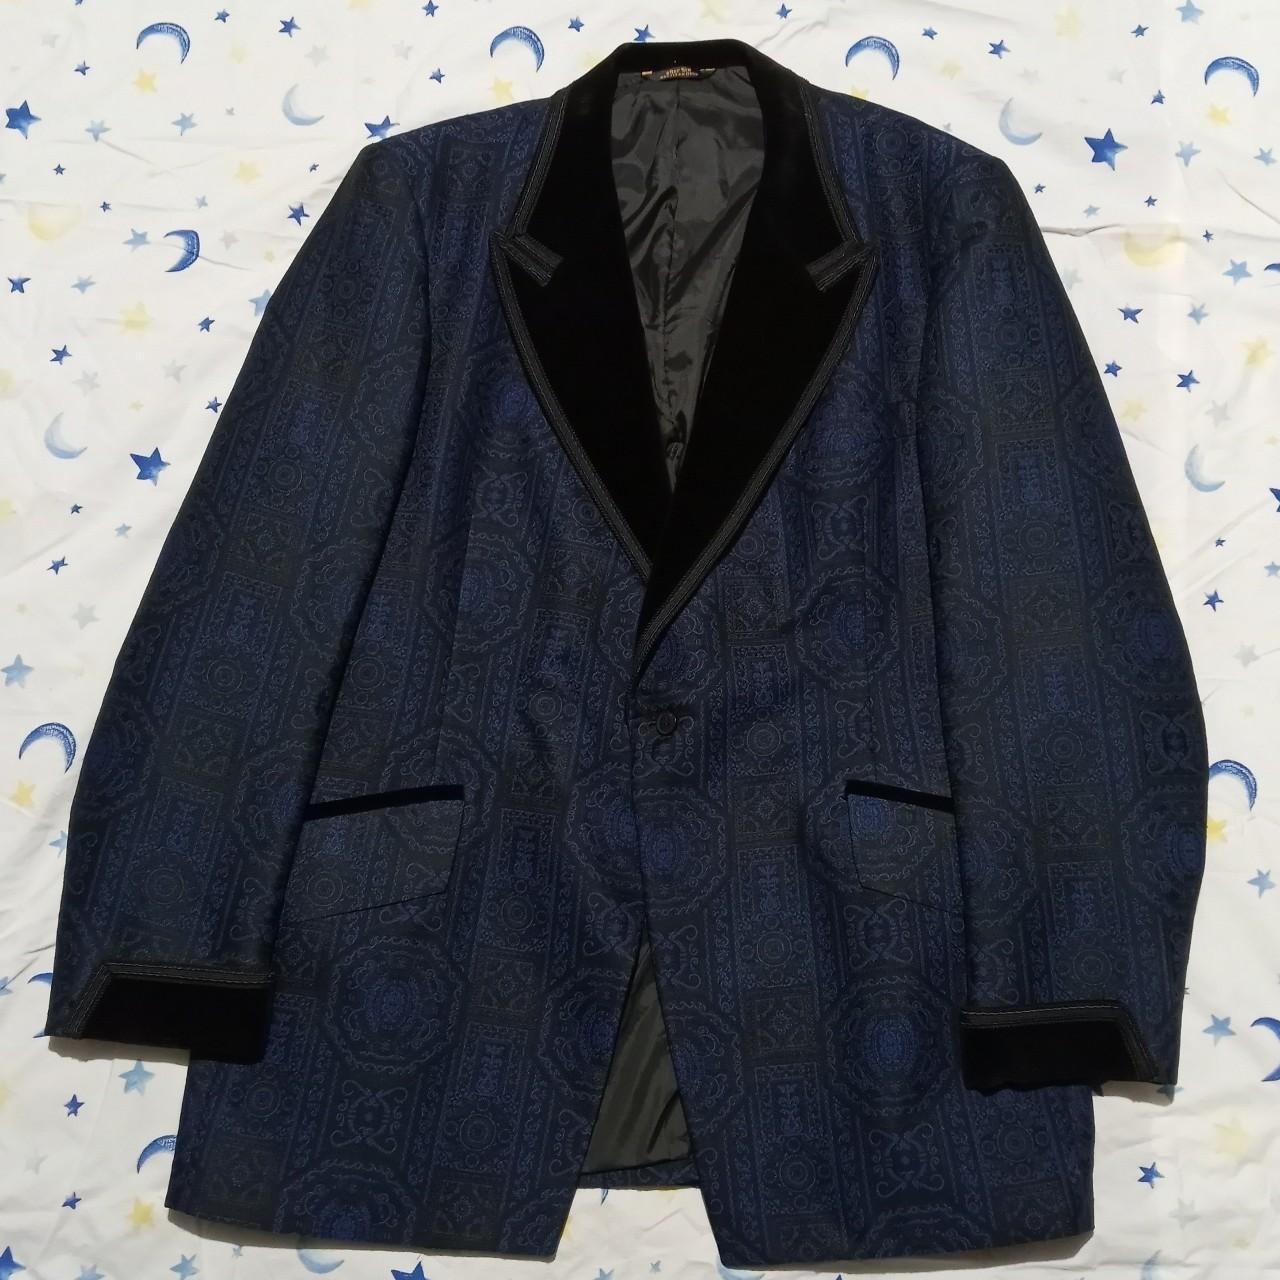 After Six Men's Black and Navy Tailored-jackets